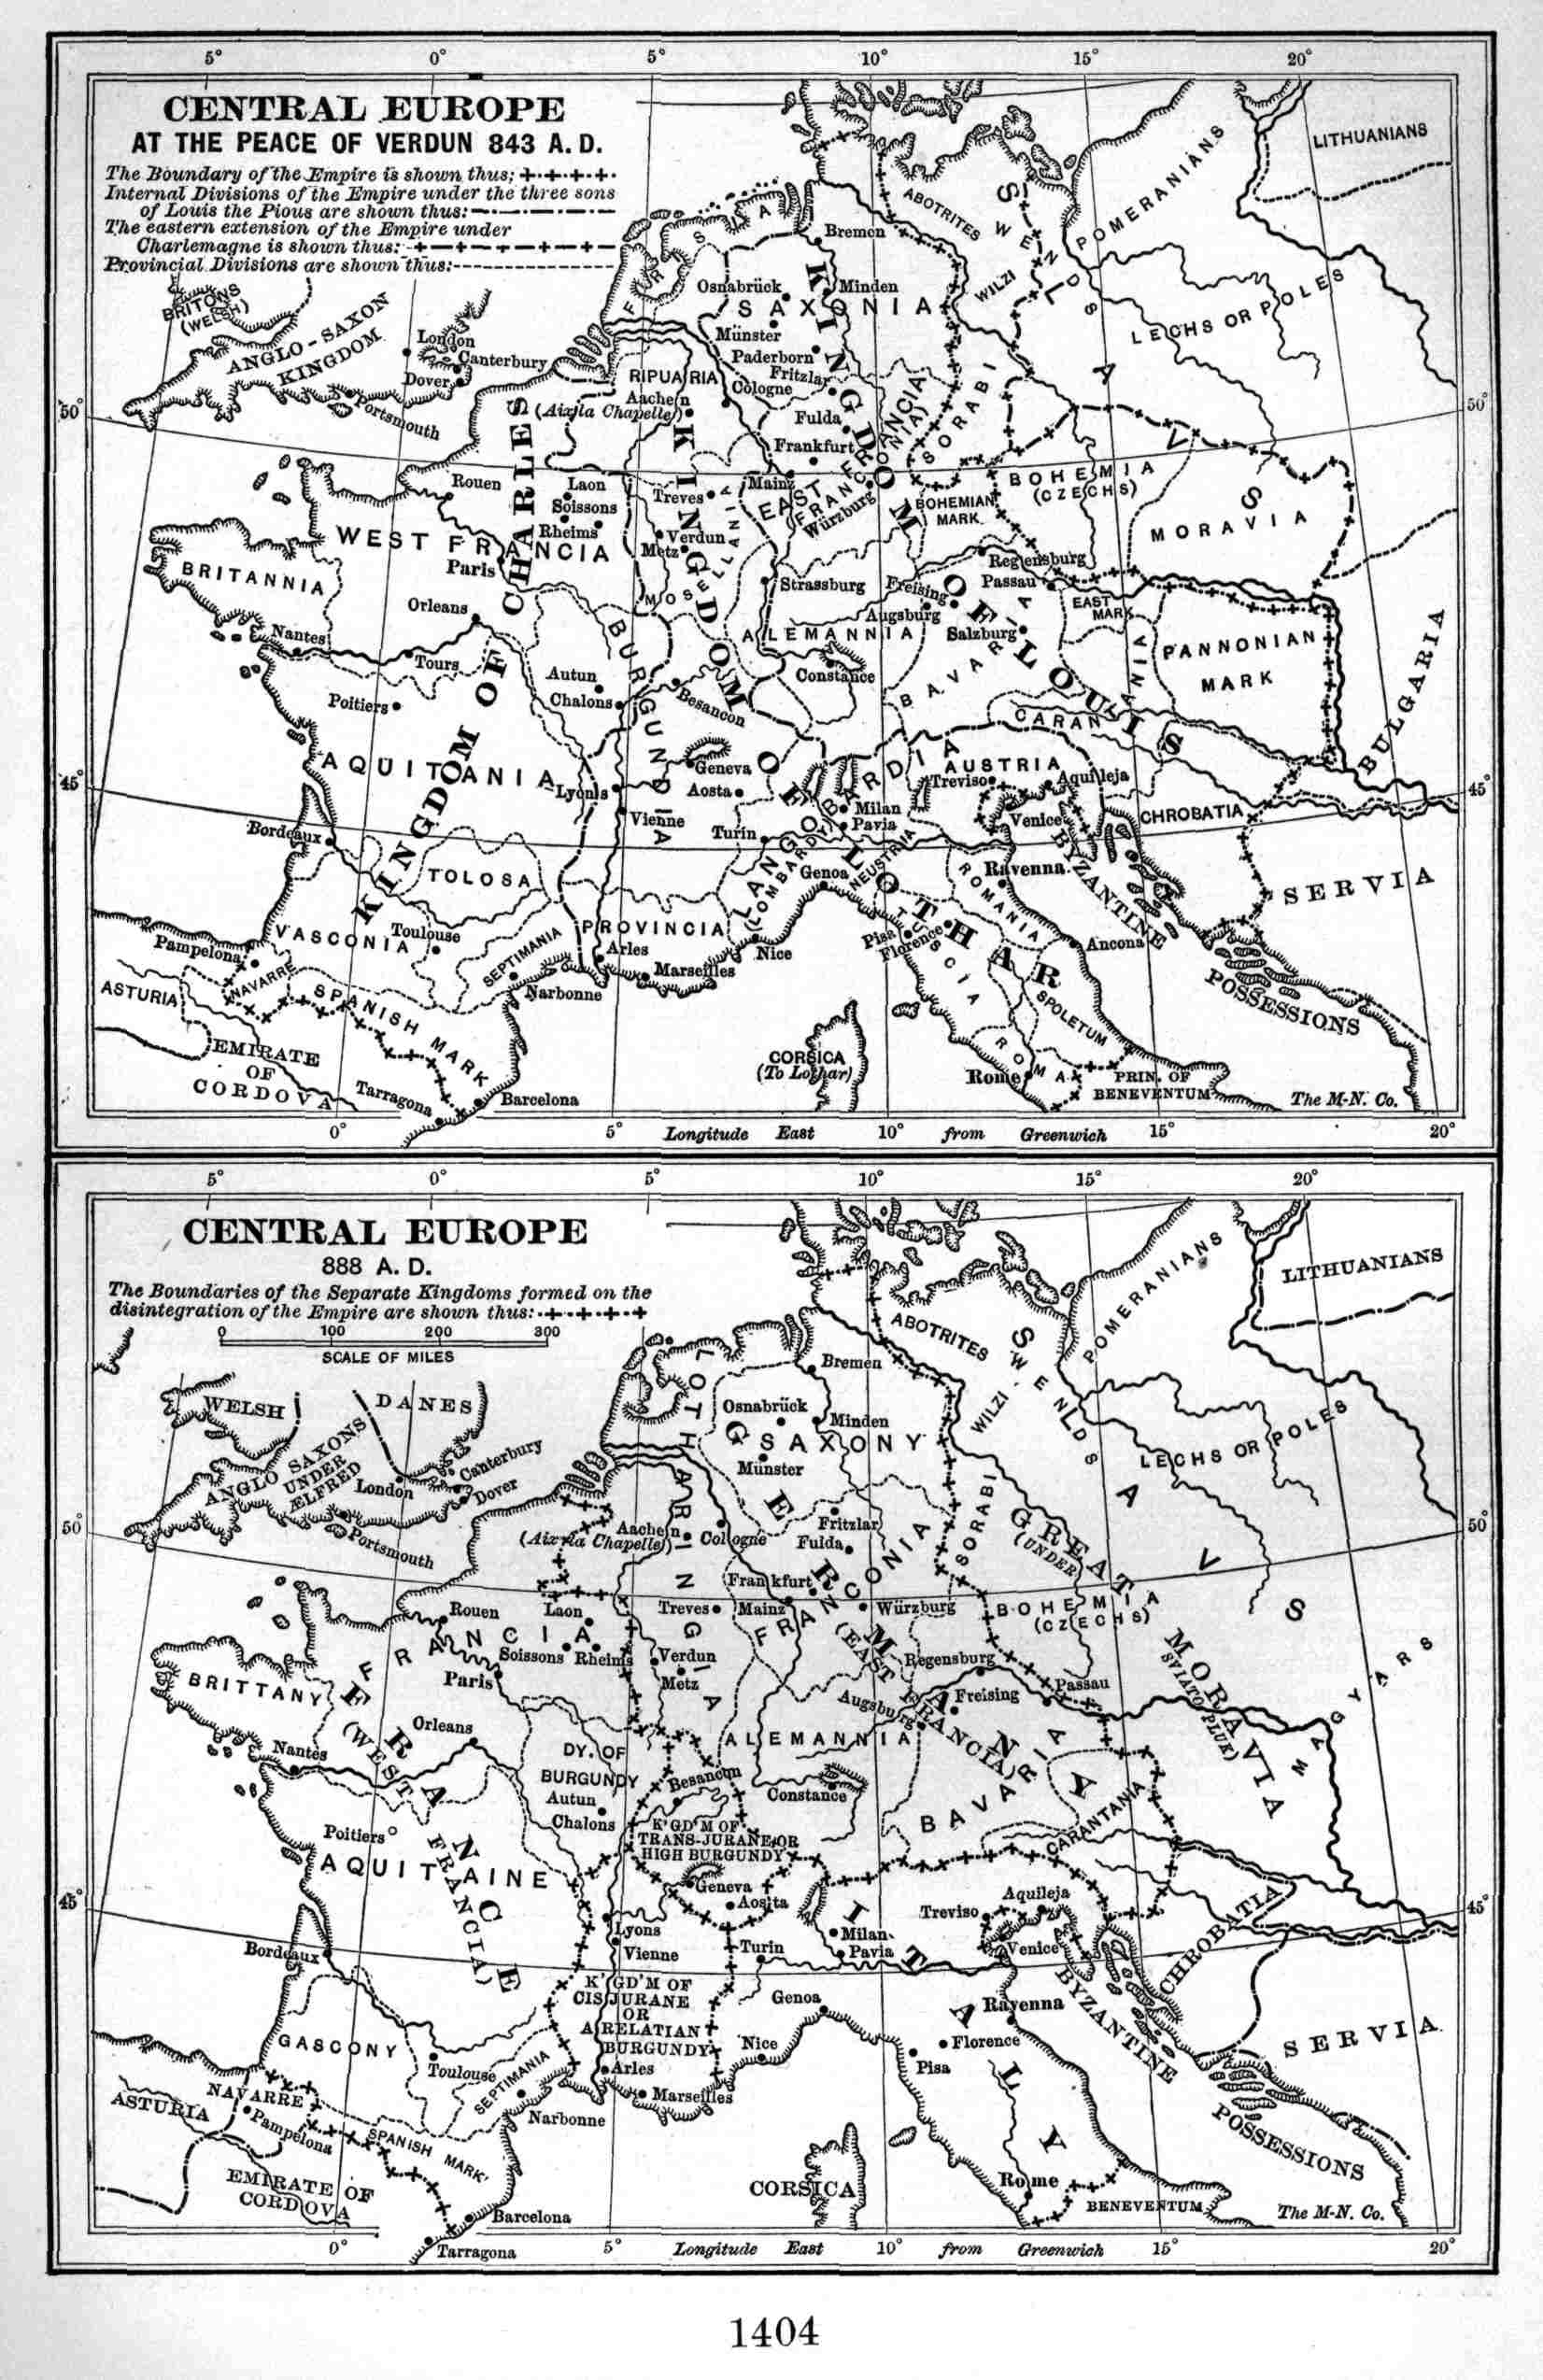 Maps of Central Europe.